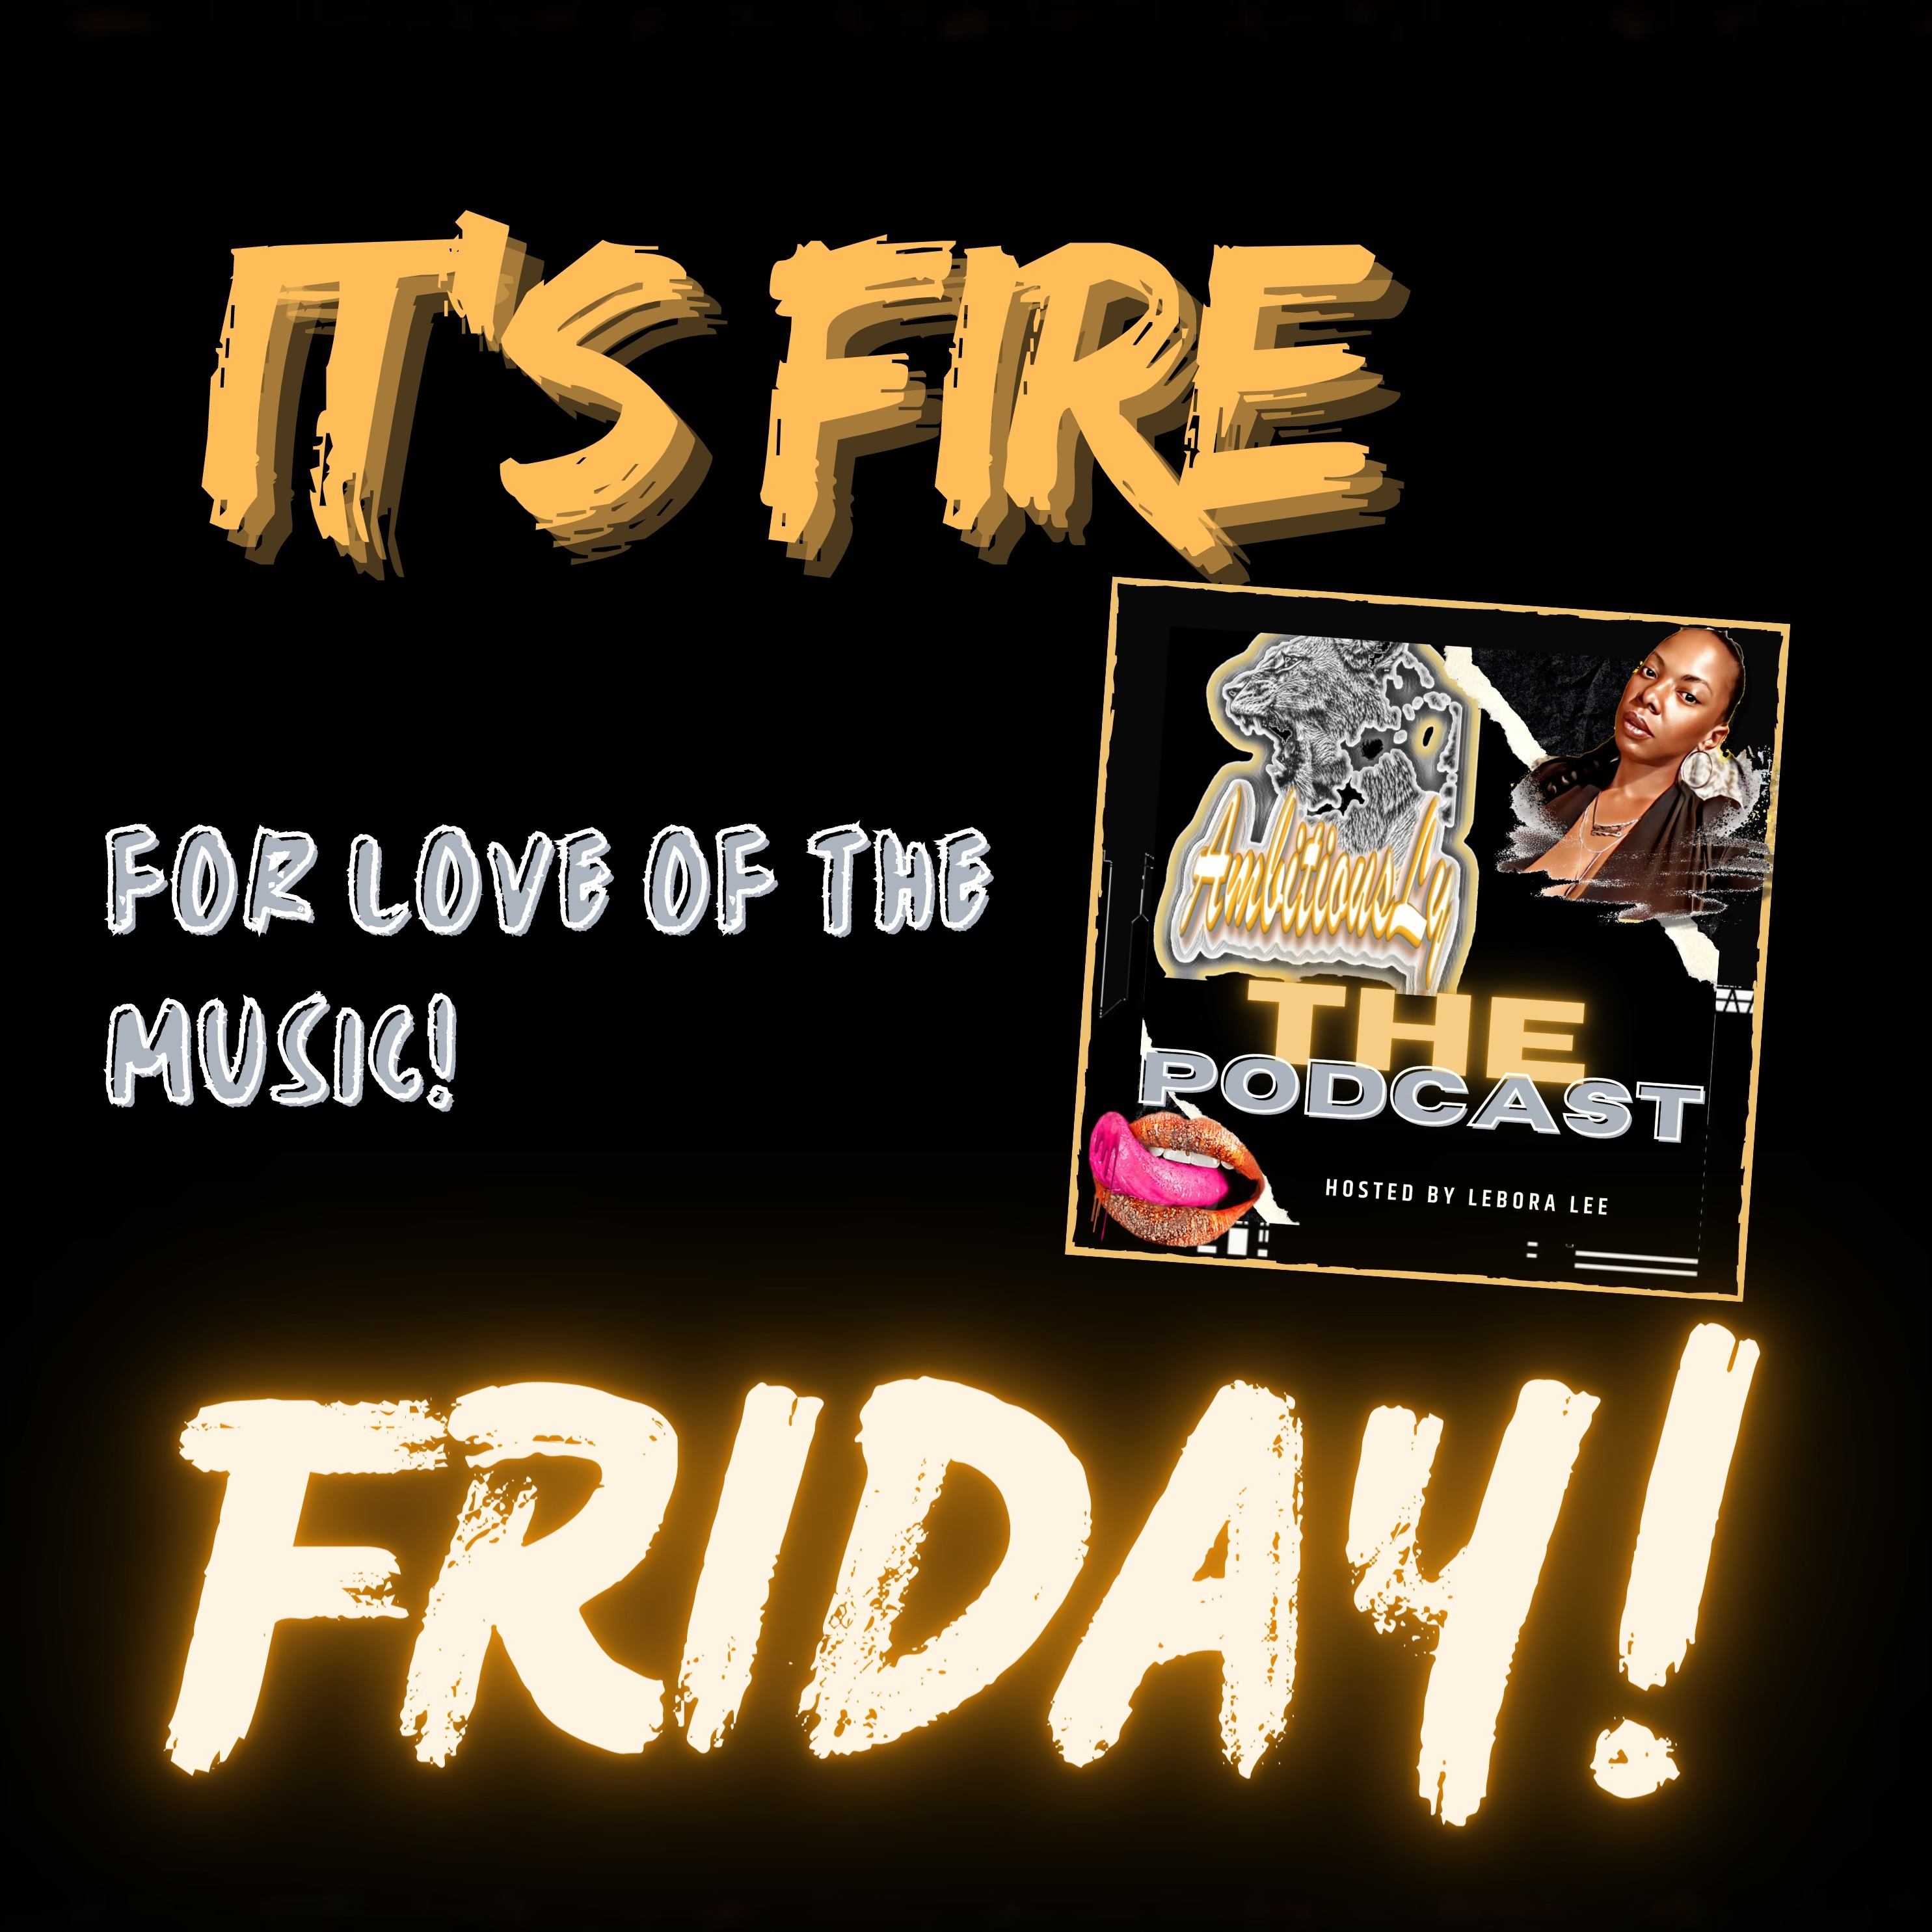 Hot Day so it's time for a HOT MIXX...Fire Friday!